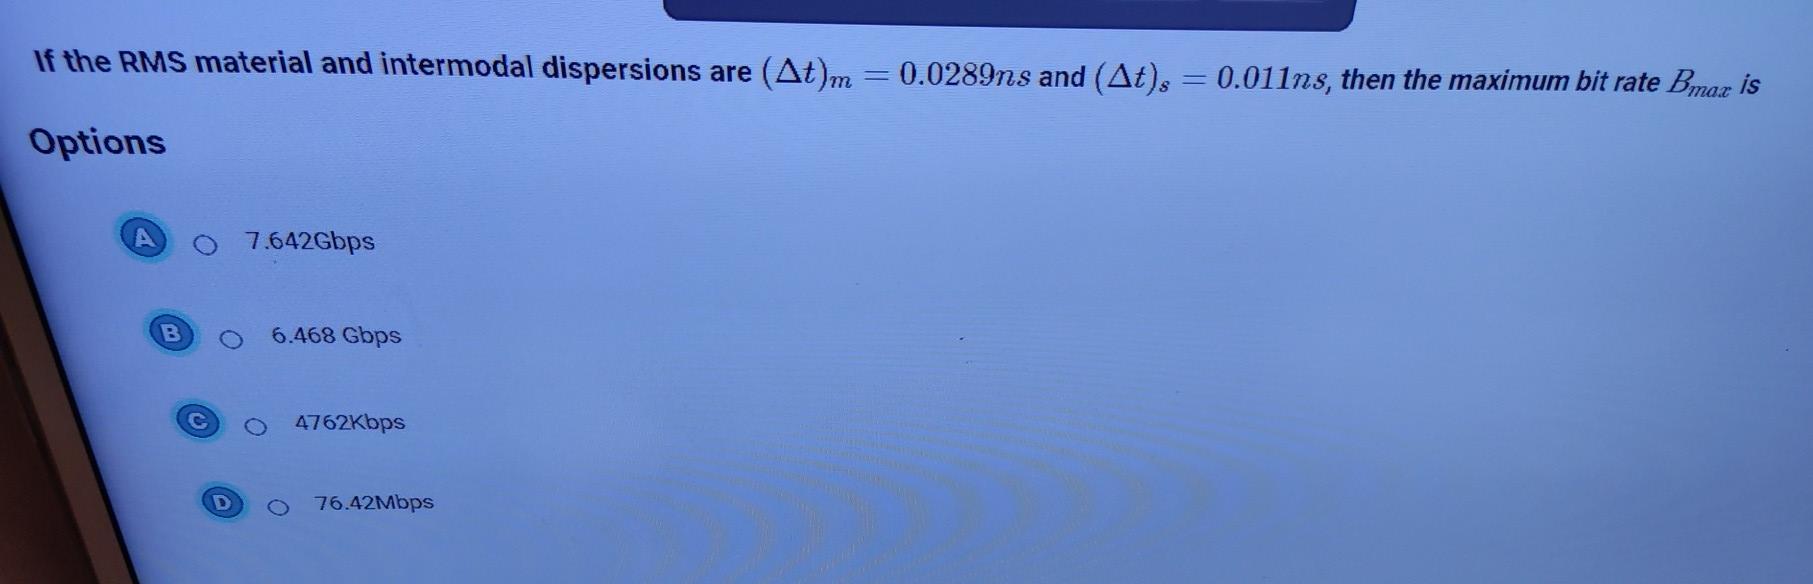 If the RMS material and intermodal dispersions are (At)m = 0.0289ns and (At)s = 0.011ns, then the maximum bit rate Bmax is Op